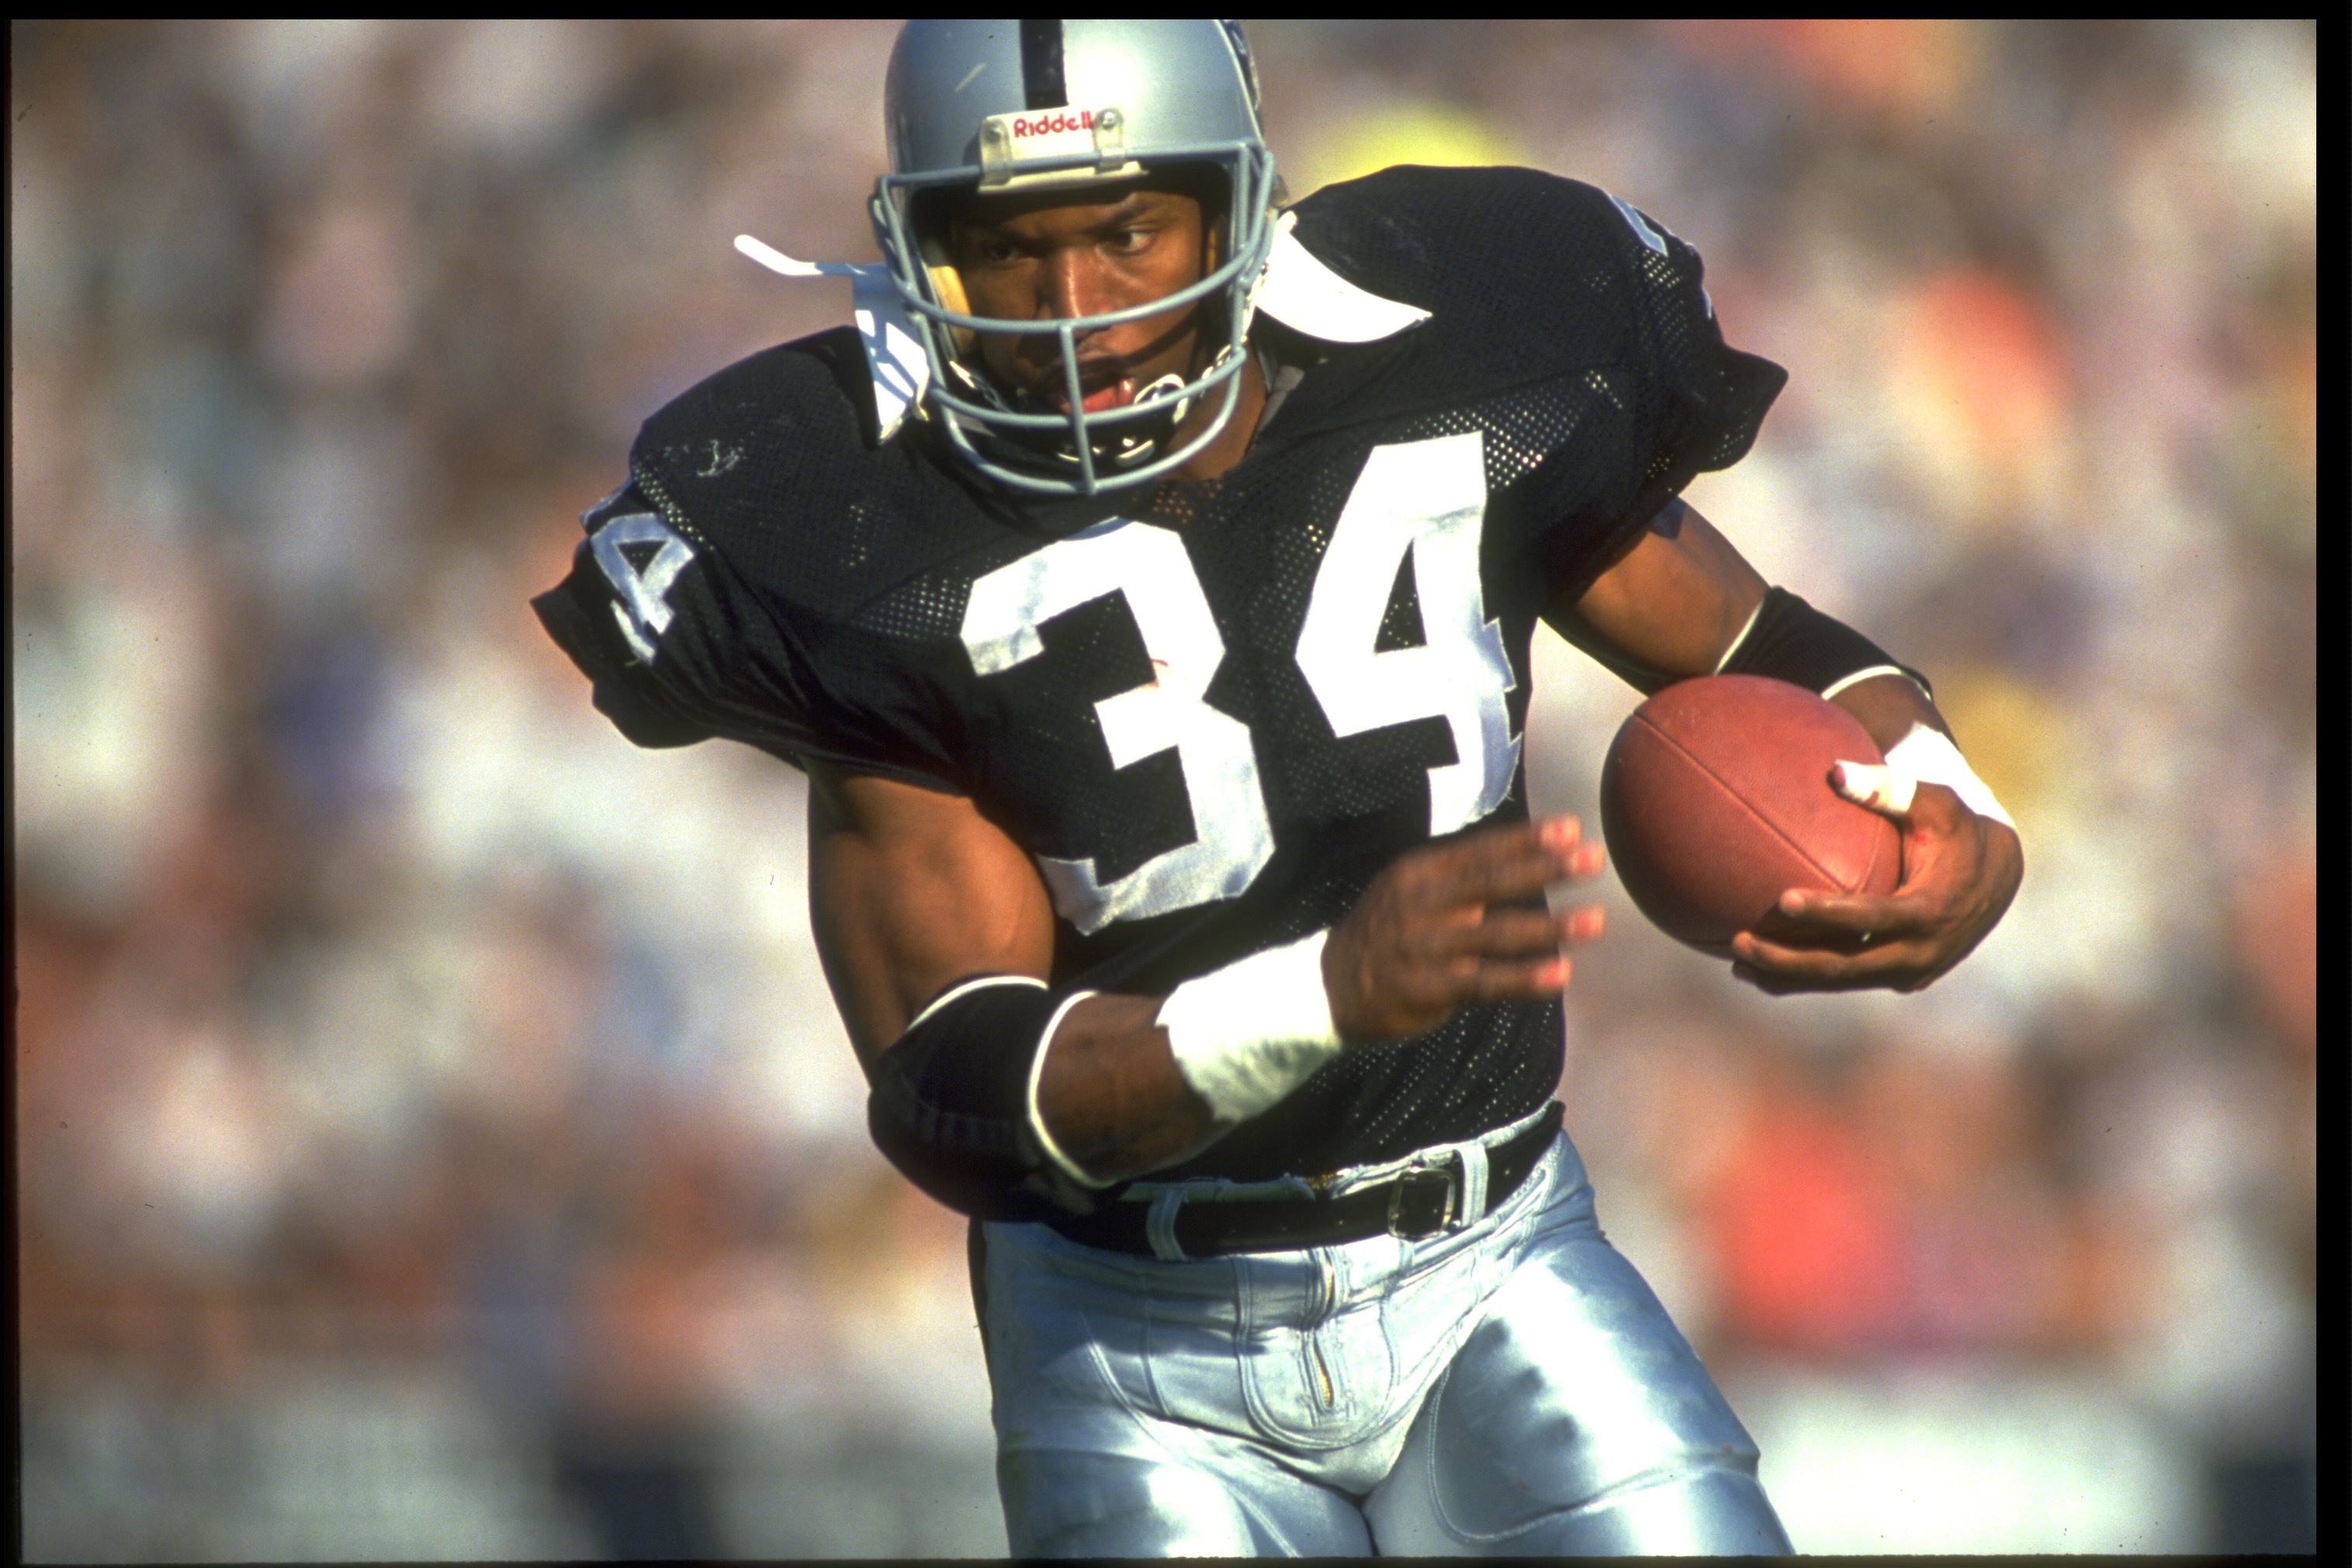 Bo Jackson one of the greatest 2 sport athletes of all time. He